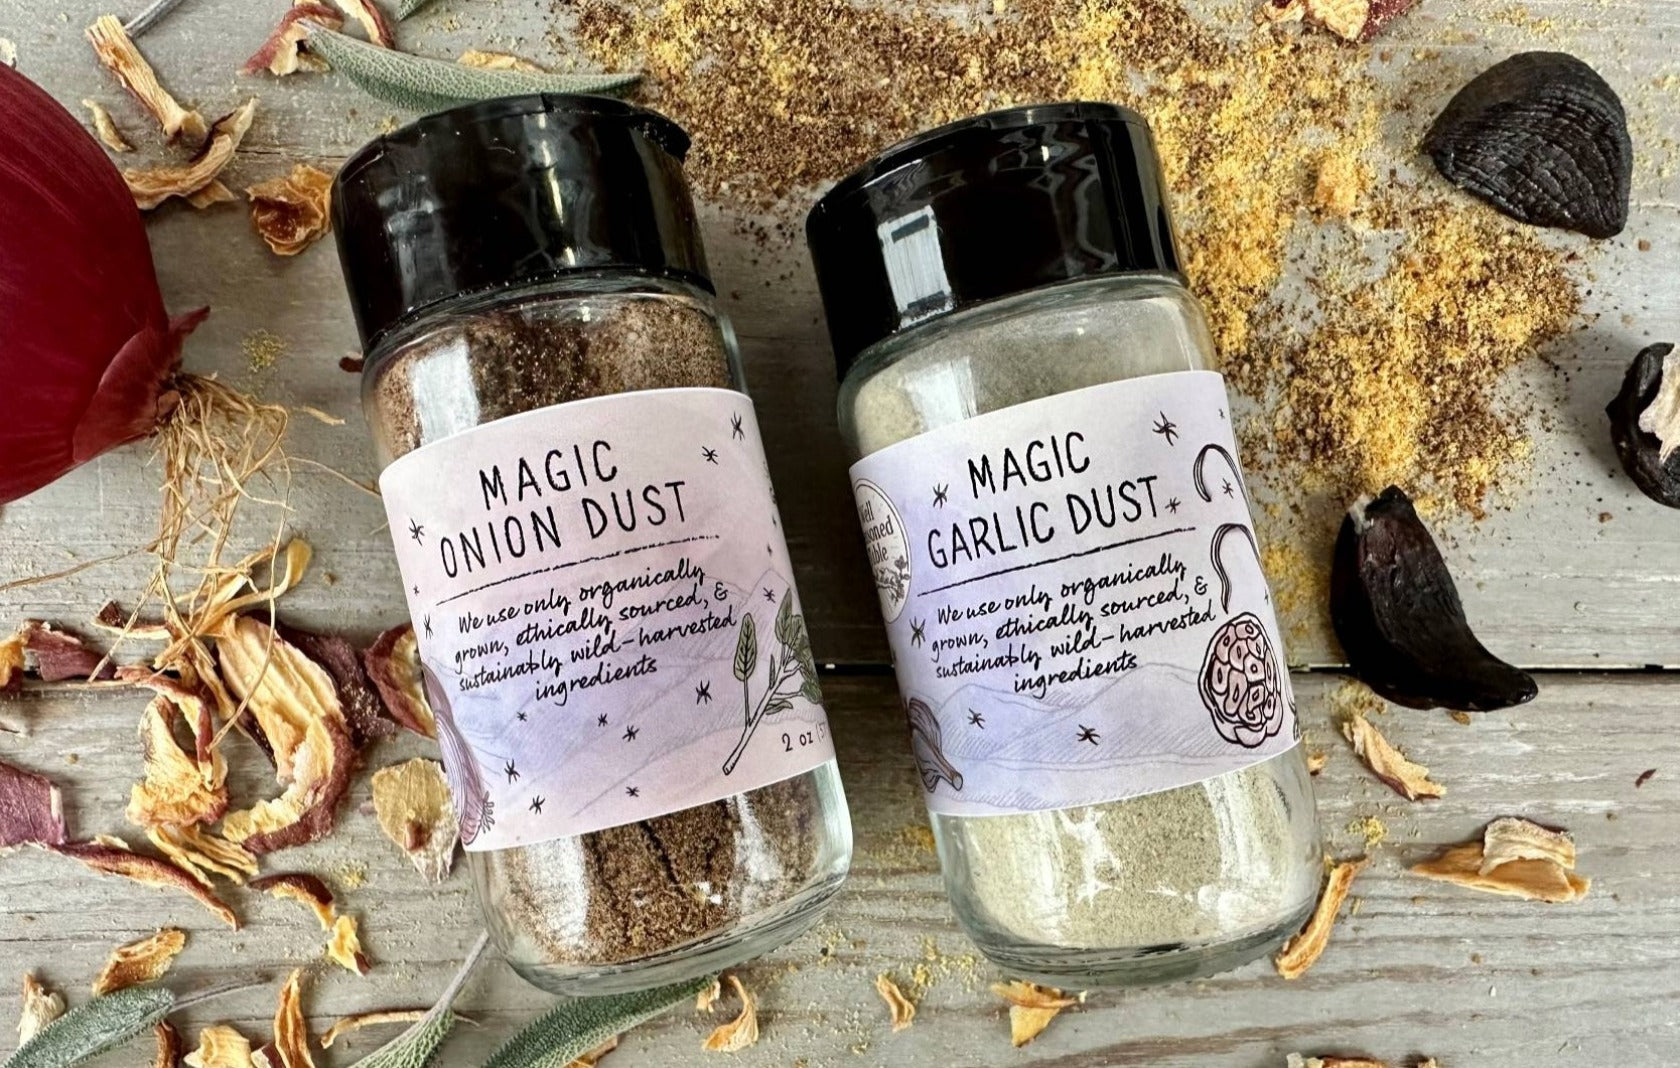 A glass seasoning jar of Magic Garlic Dust and Magic Onion Dust from Well Seasoned Table on a wooden background with onions, sage, and black garlic around it.